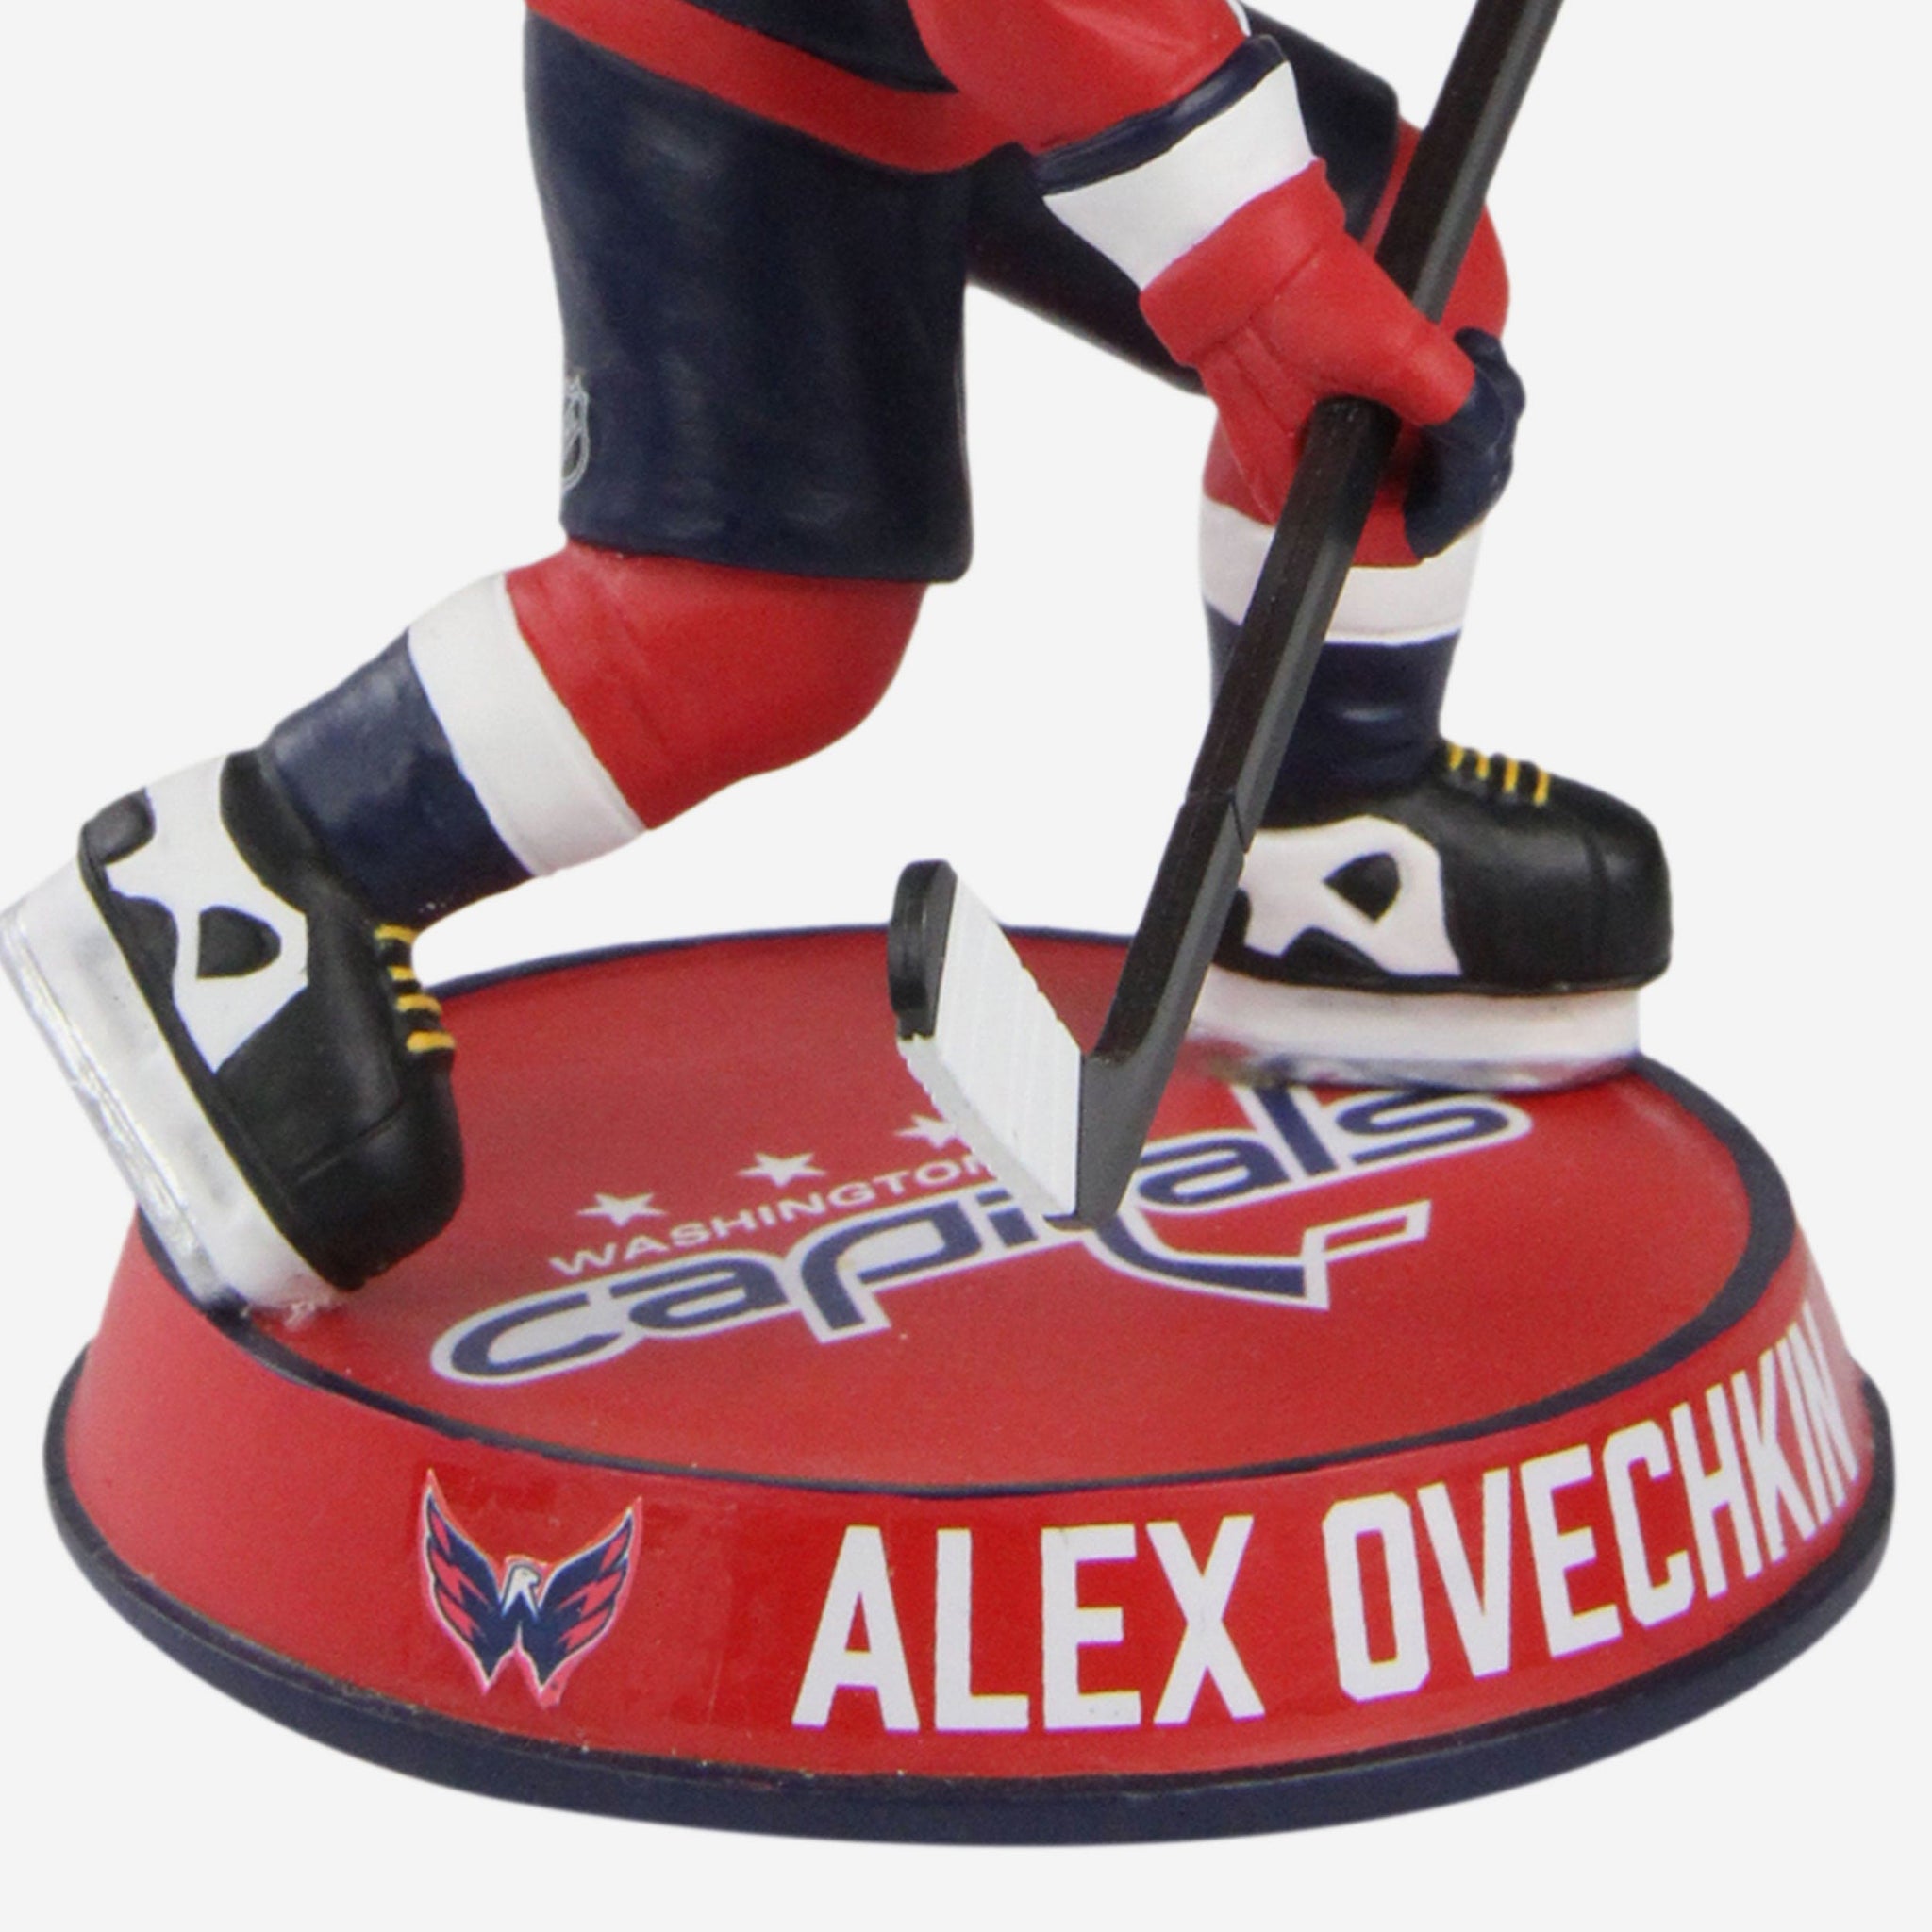 Youth Alexander Ovechkin Red Washington Capitals Name & Number T